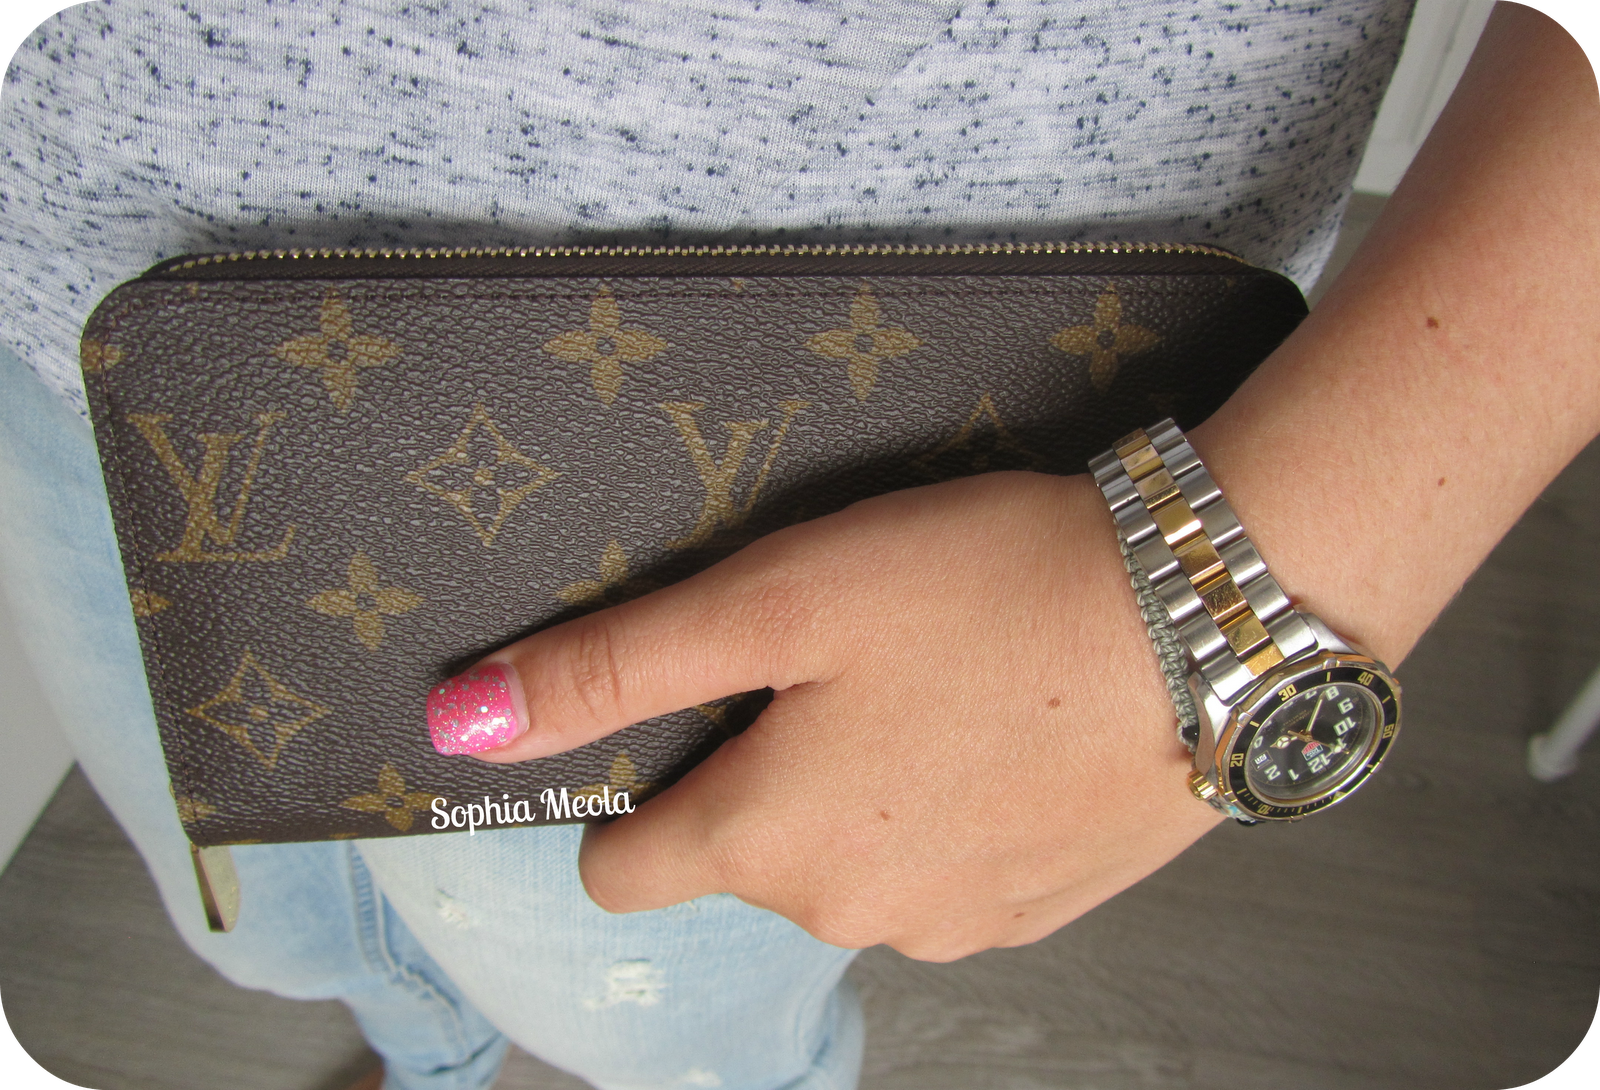 Check out my new Louis Vuitton Zippy Wallet. The LV Zippy 